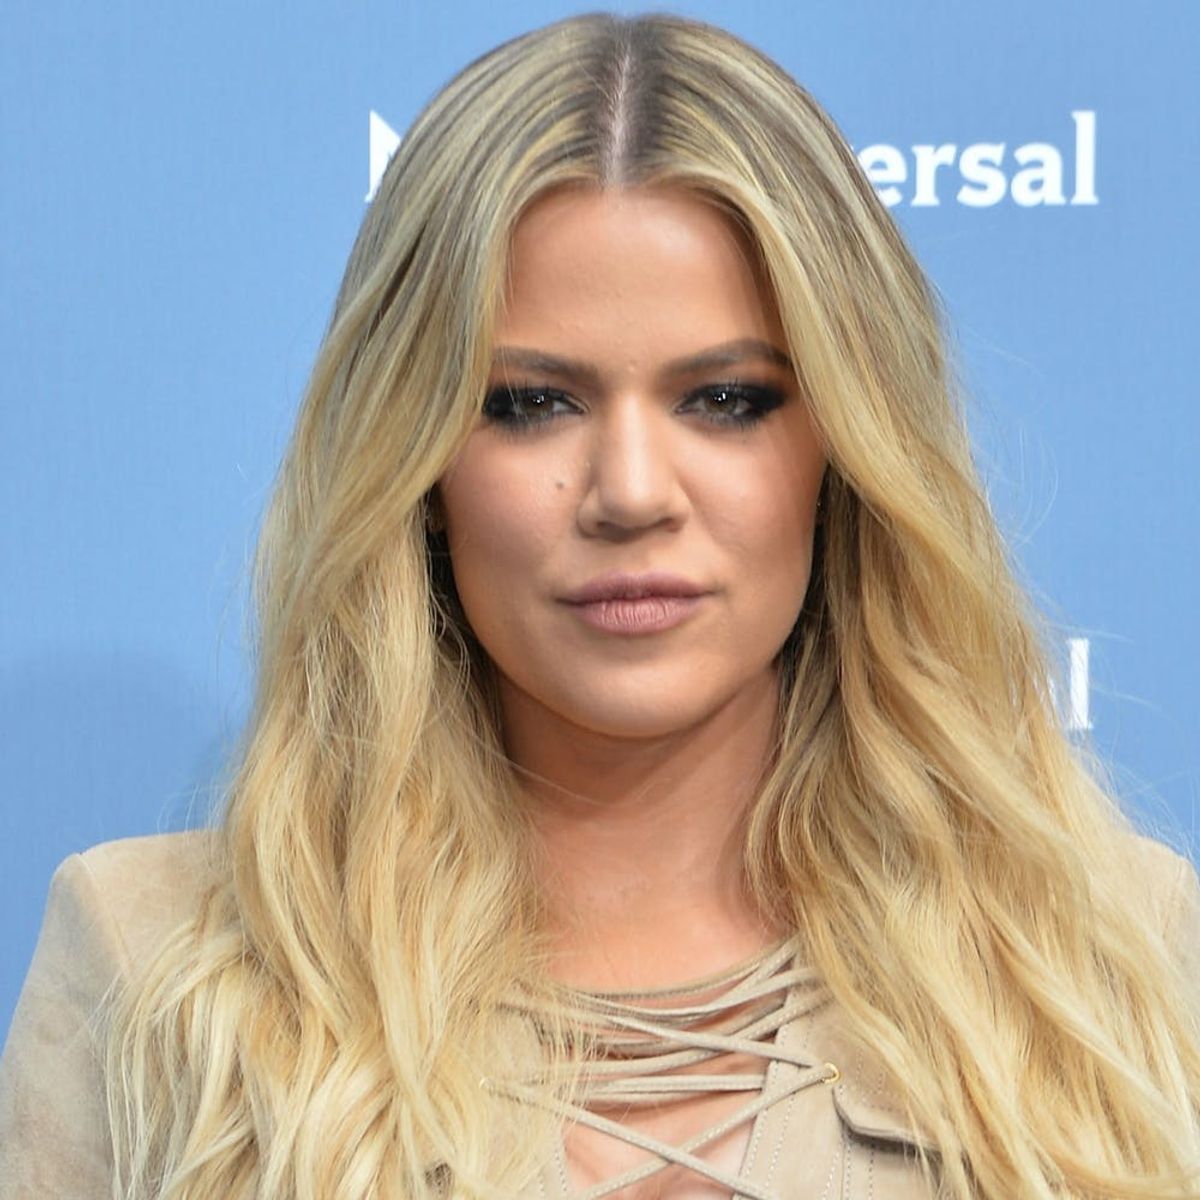 Khloe Kardashian Lets You in on the Only Makeup Hack You’ll Need This Summer